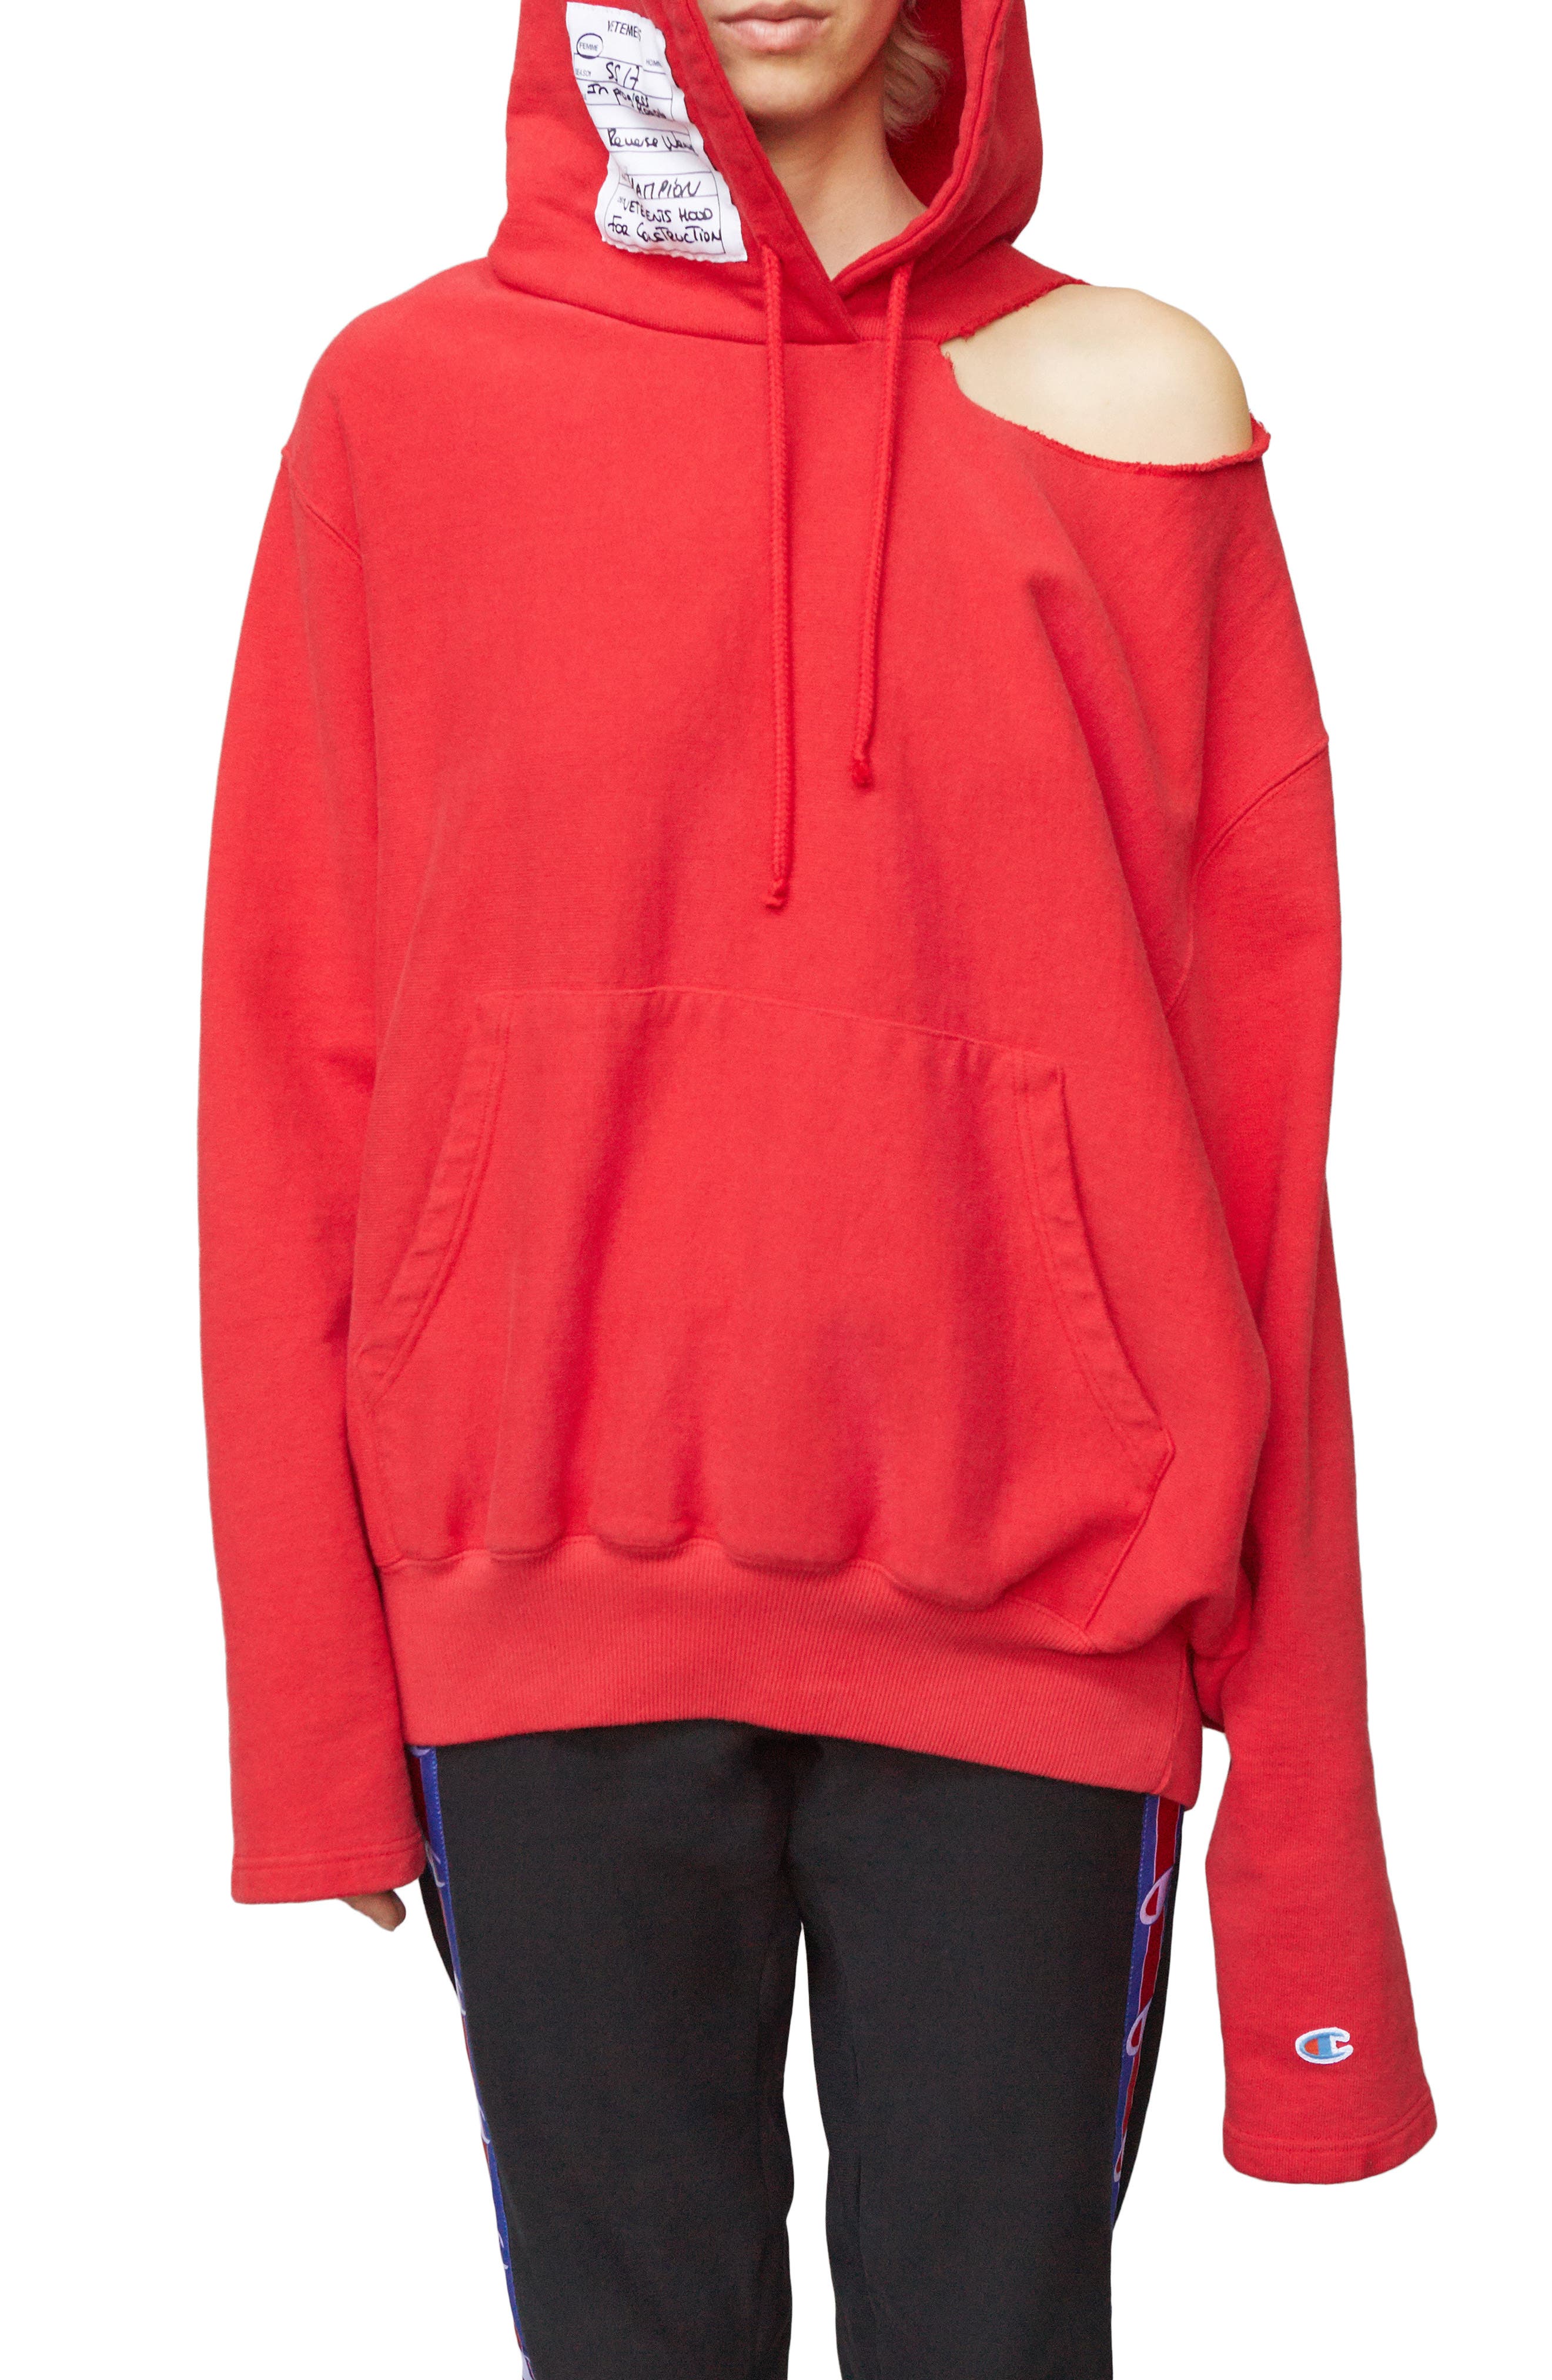 hoodie with shoulder cutouts